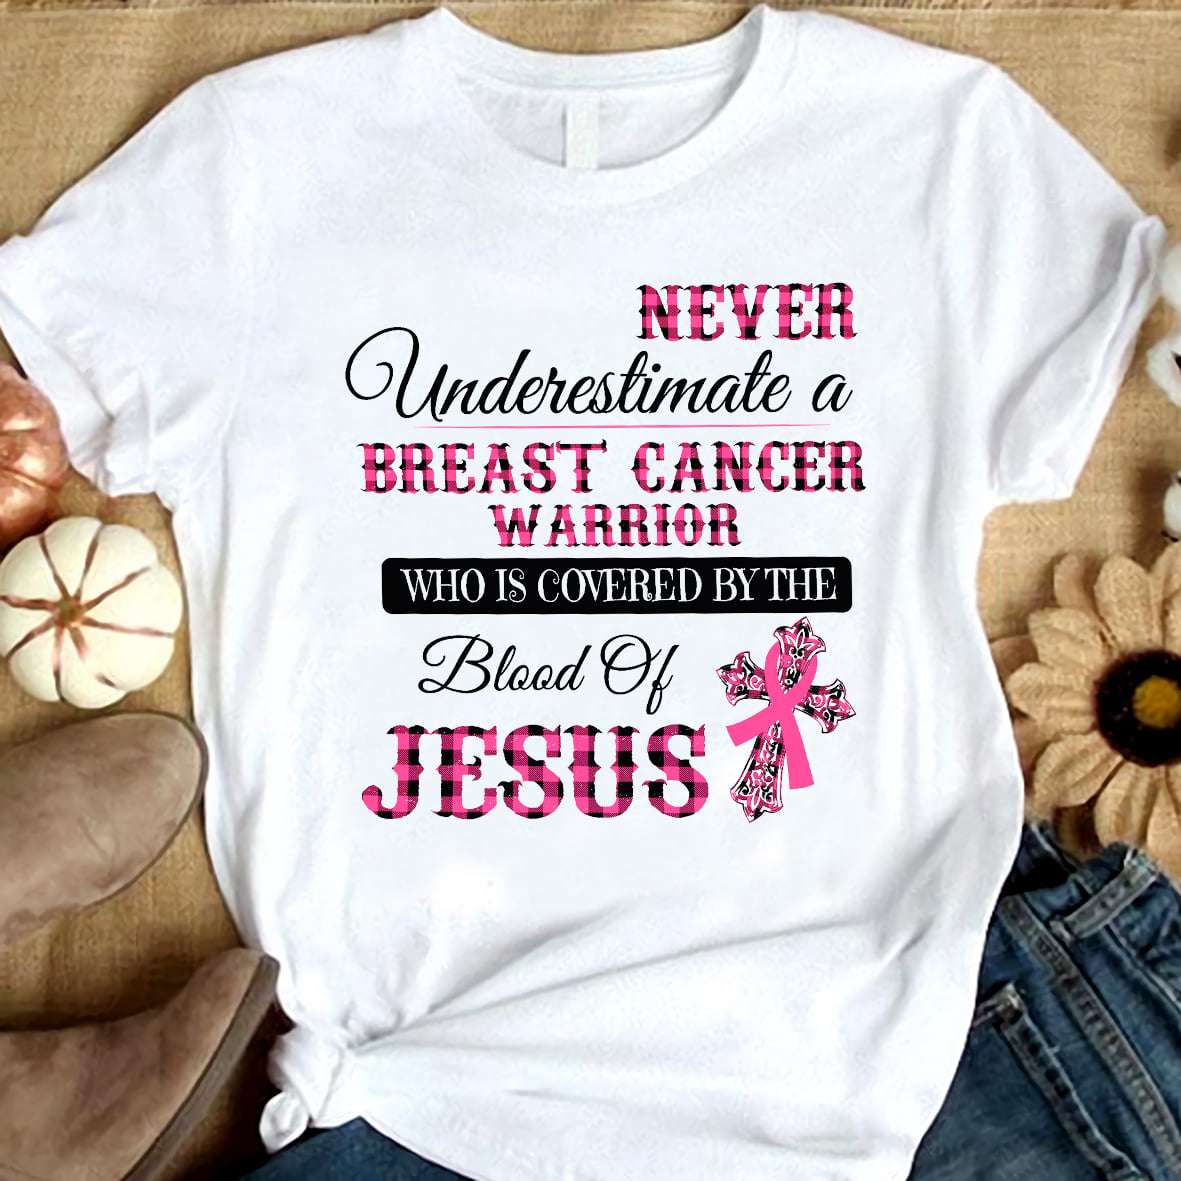 Never underestimate a breast cancer warrior who is covered by the blood of Jesus - Jesus the god